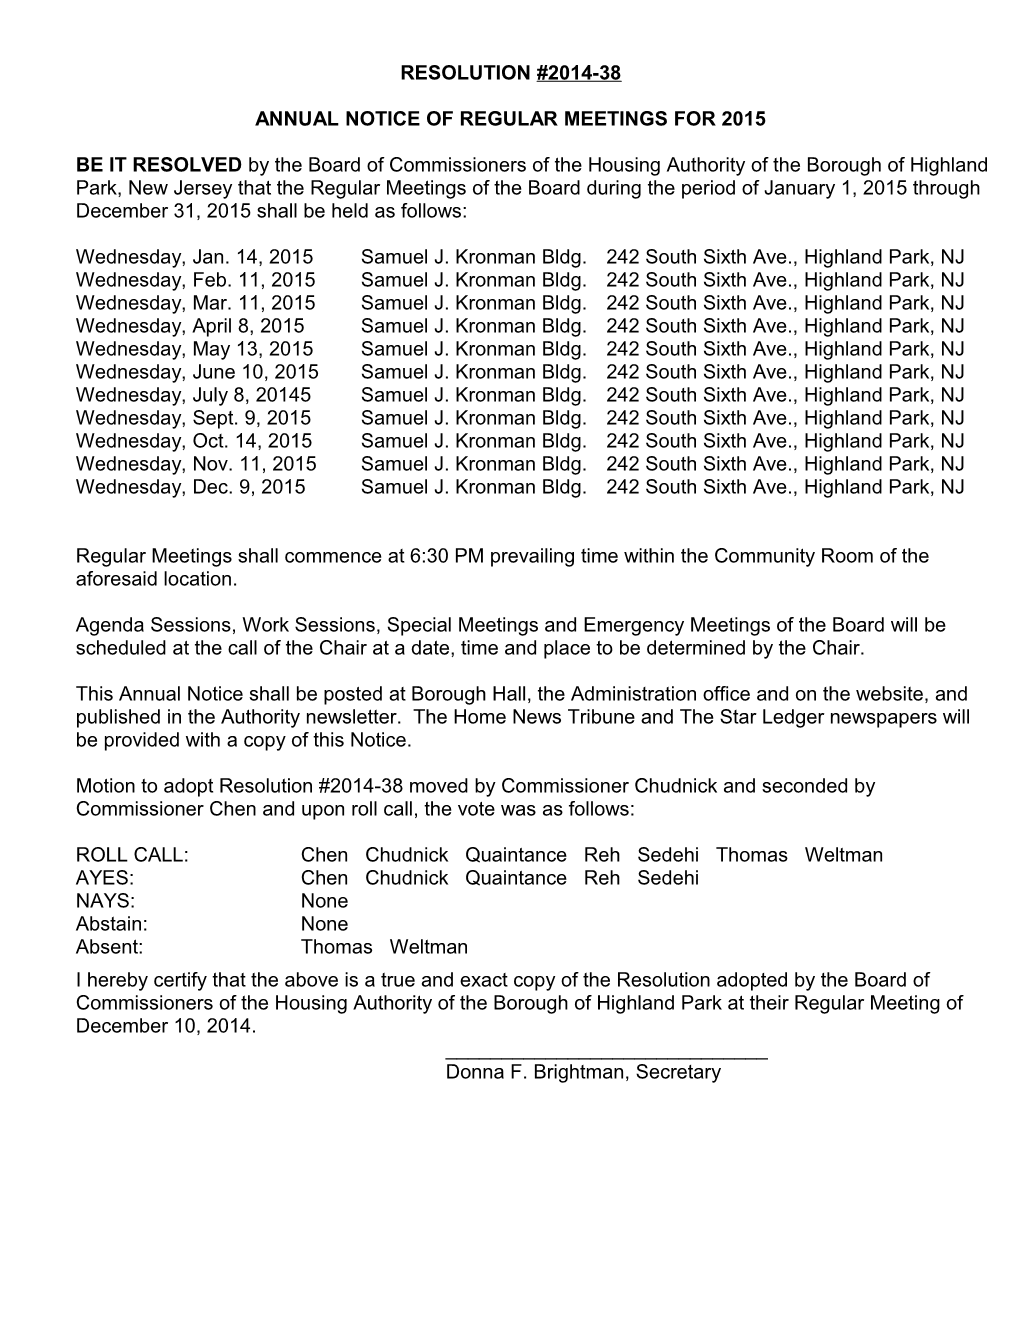 Annual Notice of Regular Meetings for 2015